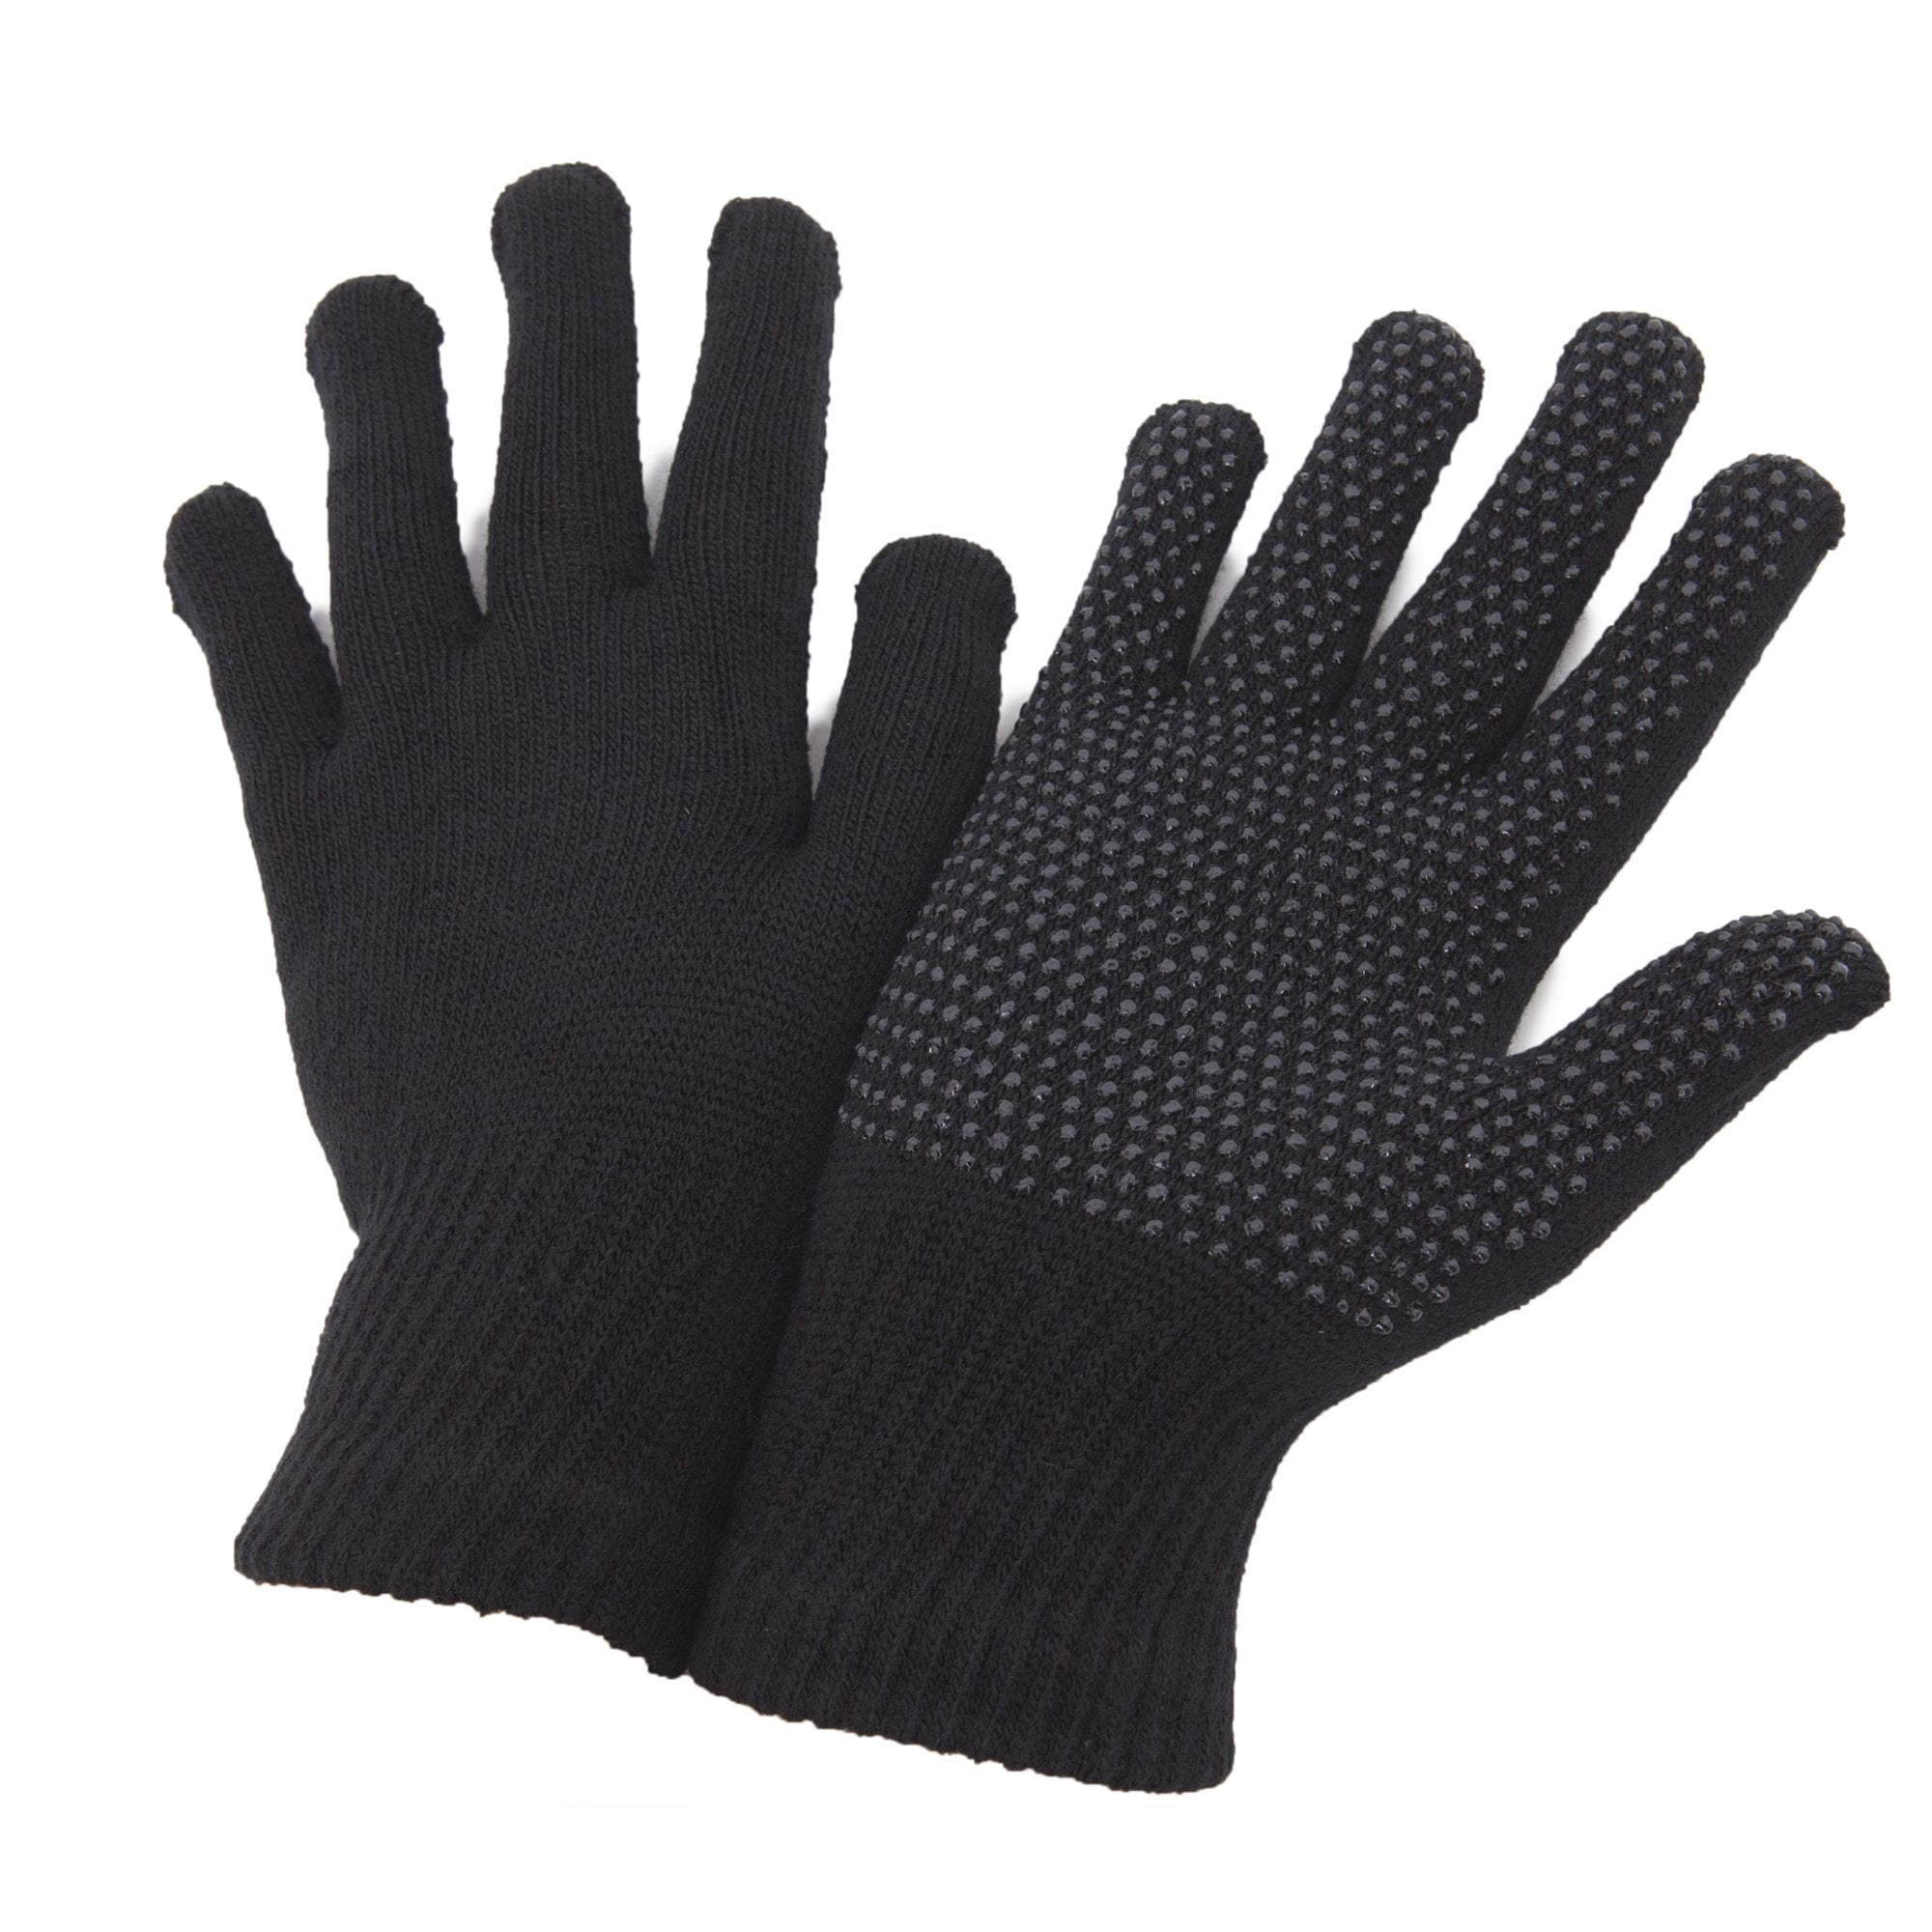 Shires Winter Warm Long Cuff Gloves 